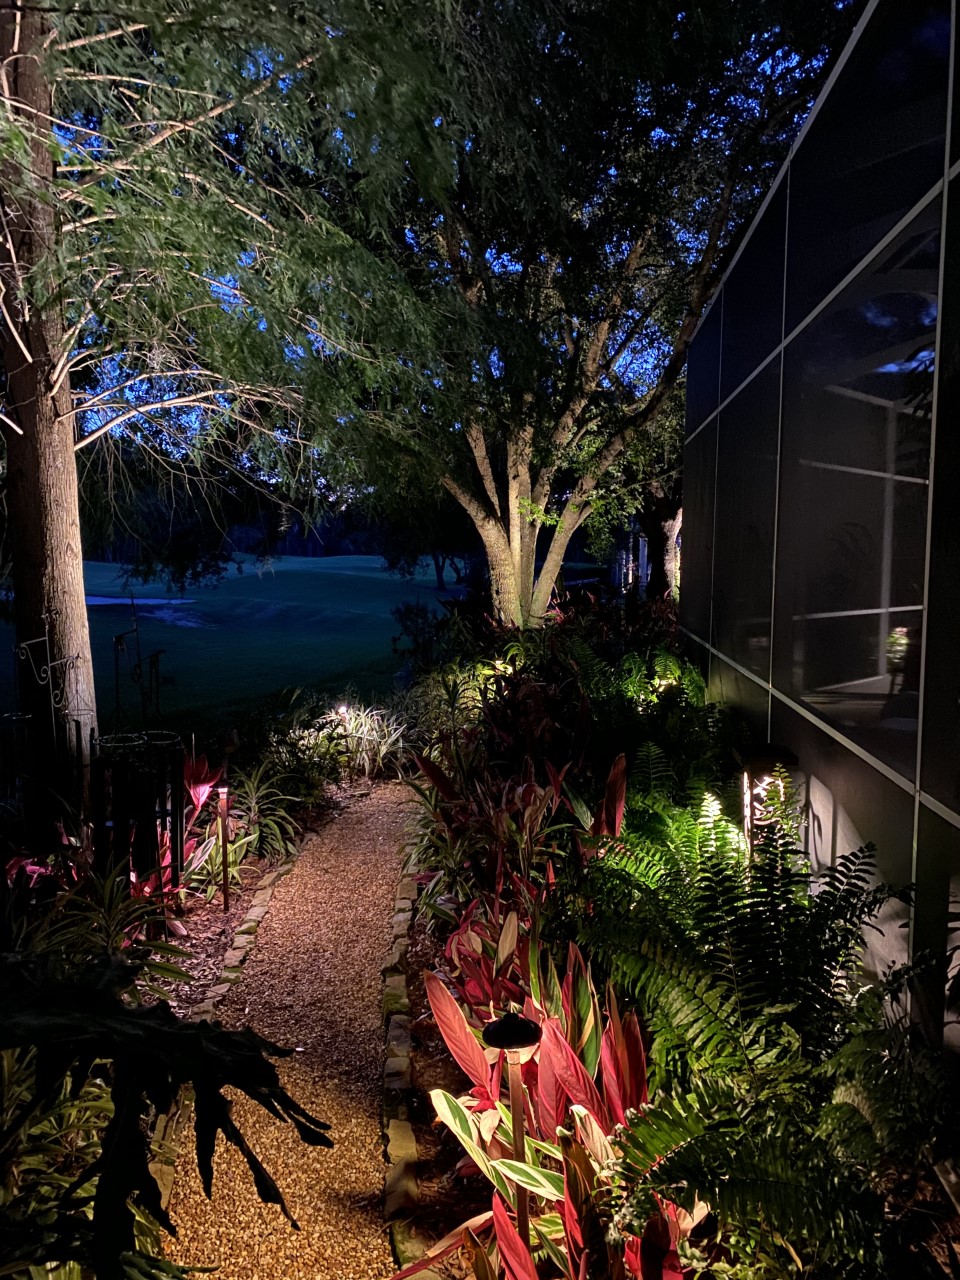 Clearwater decorative landscape lighting